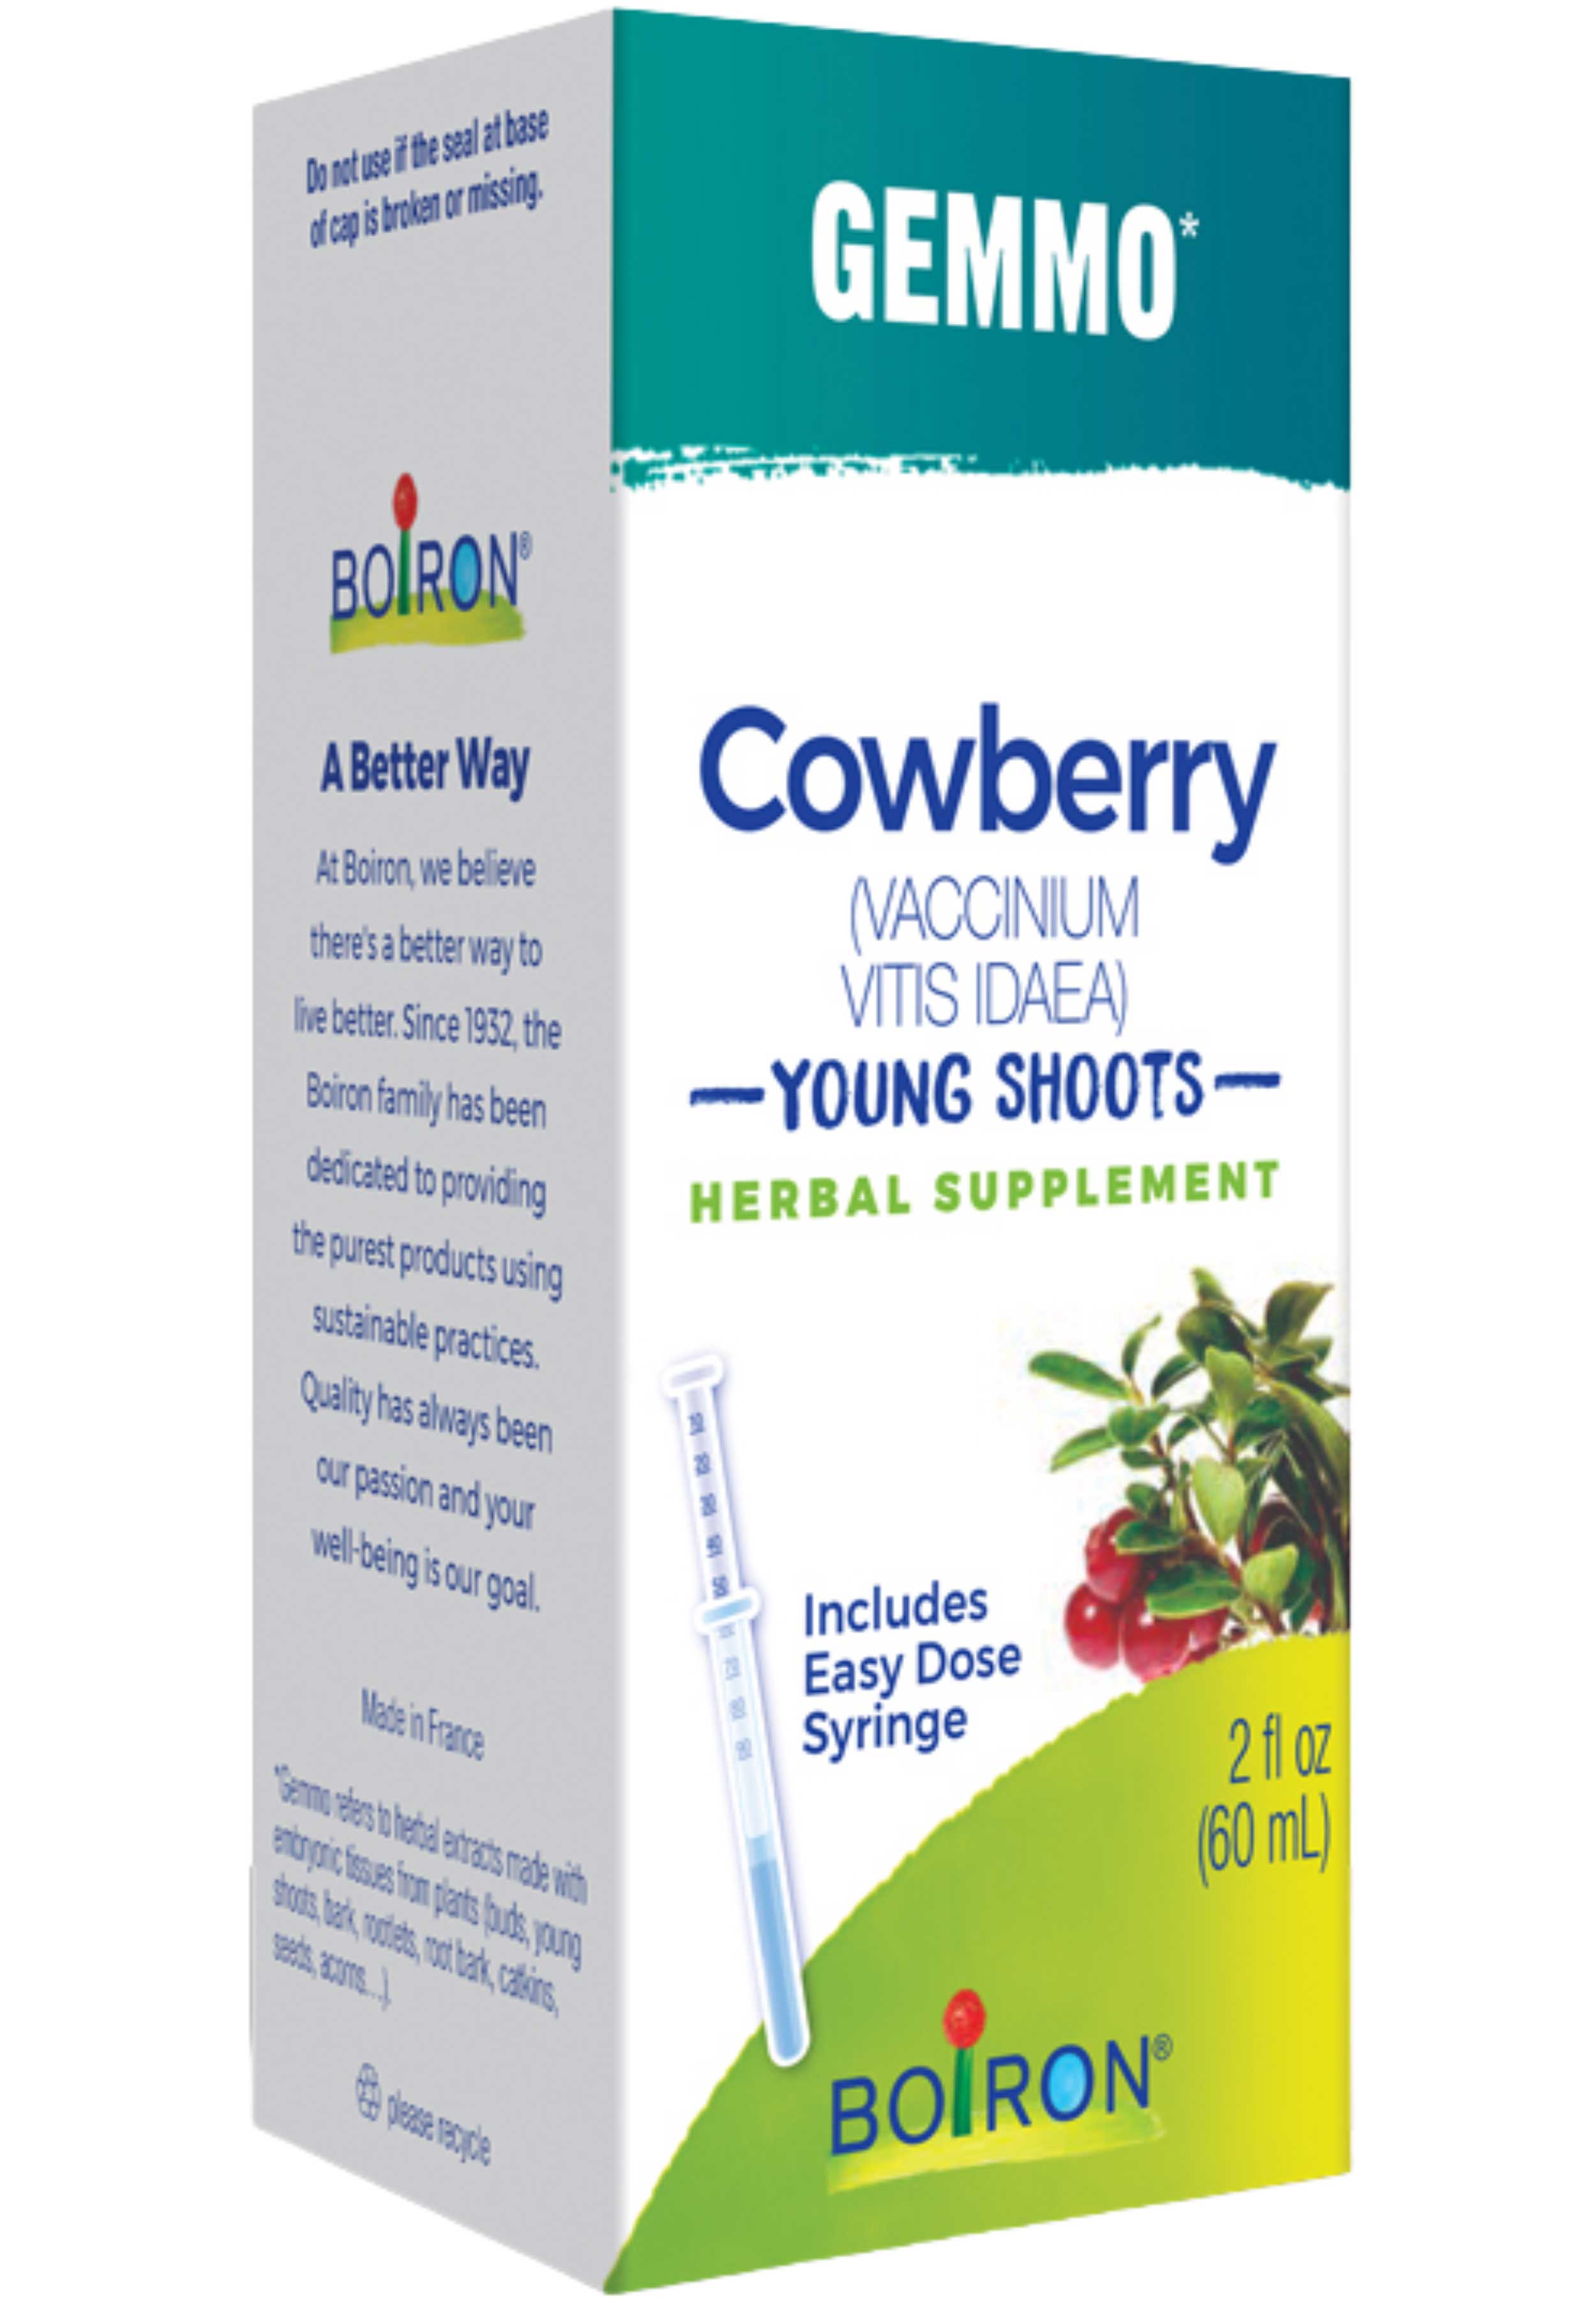 Boiron Homeopathics Gemmo Cowberry Young Shoots